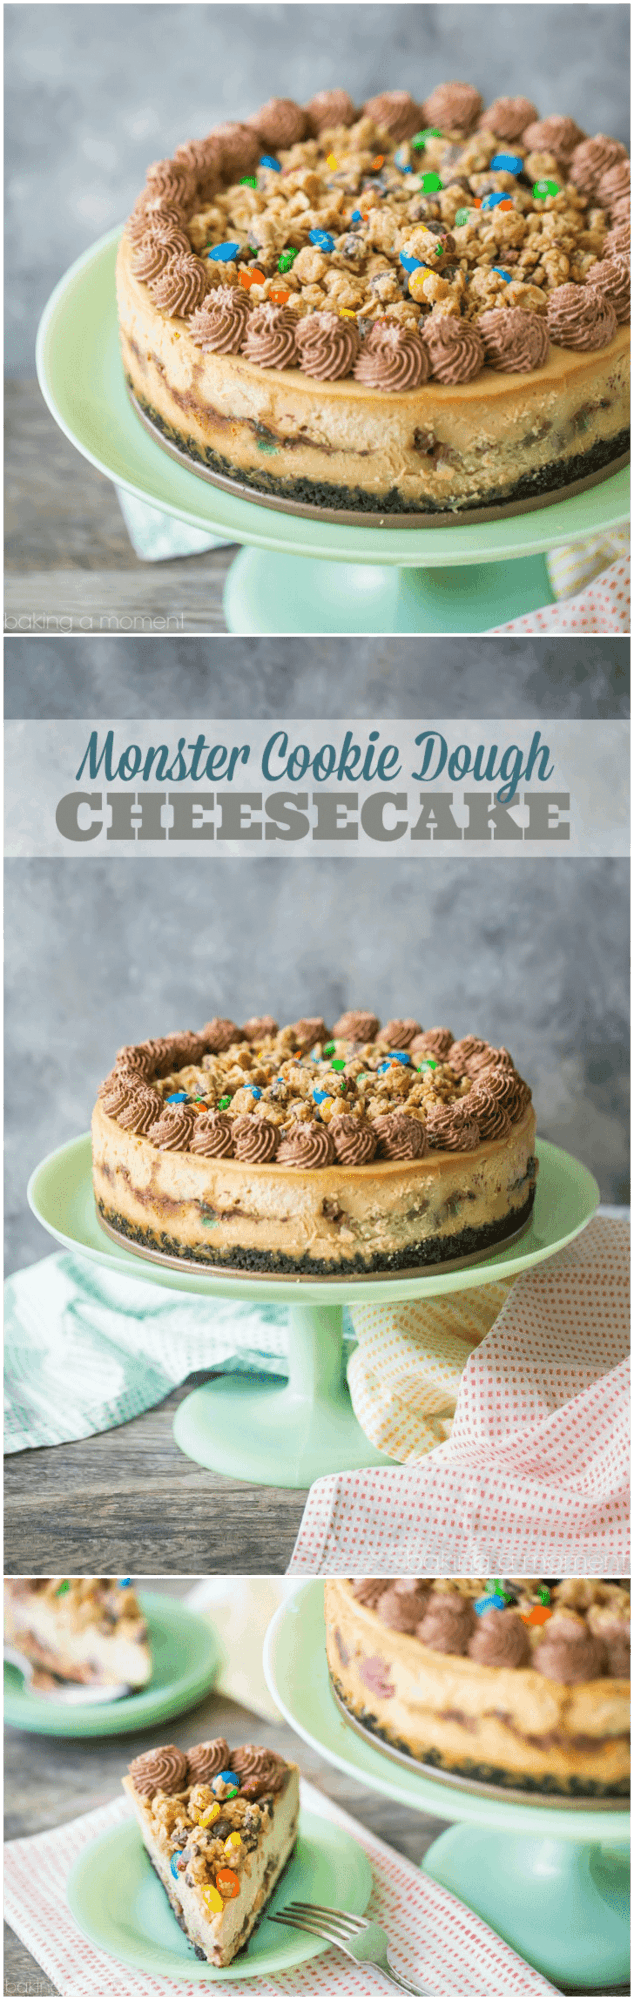 Monster Cookie Dough Cheesecake: OMG this dessert is completely over-the-top! Peanut butter cheesecake with hunks of peanut butter oatmeal m&m cookie dough, on an Oreo cookie crust, with more cookie dough on top and swirls of chocolate whipped cream. Such an incredible indulgence! 